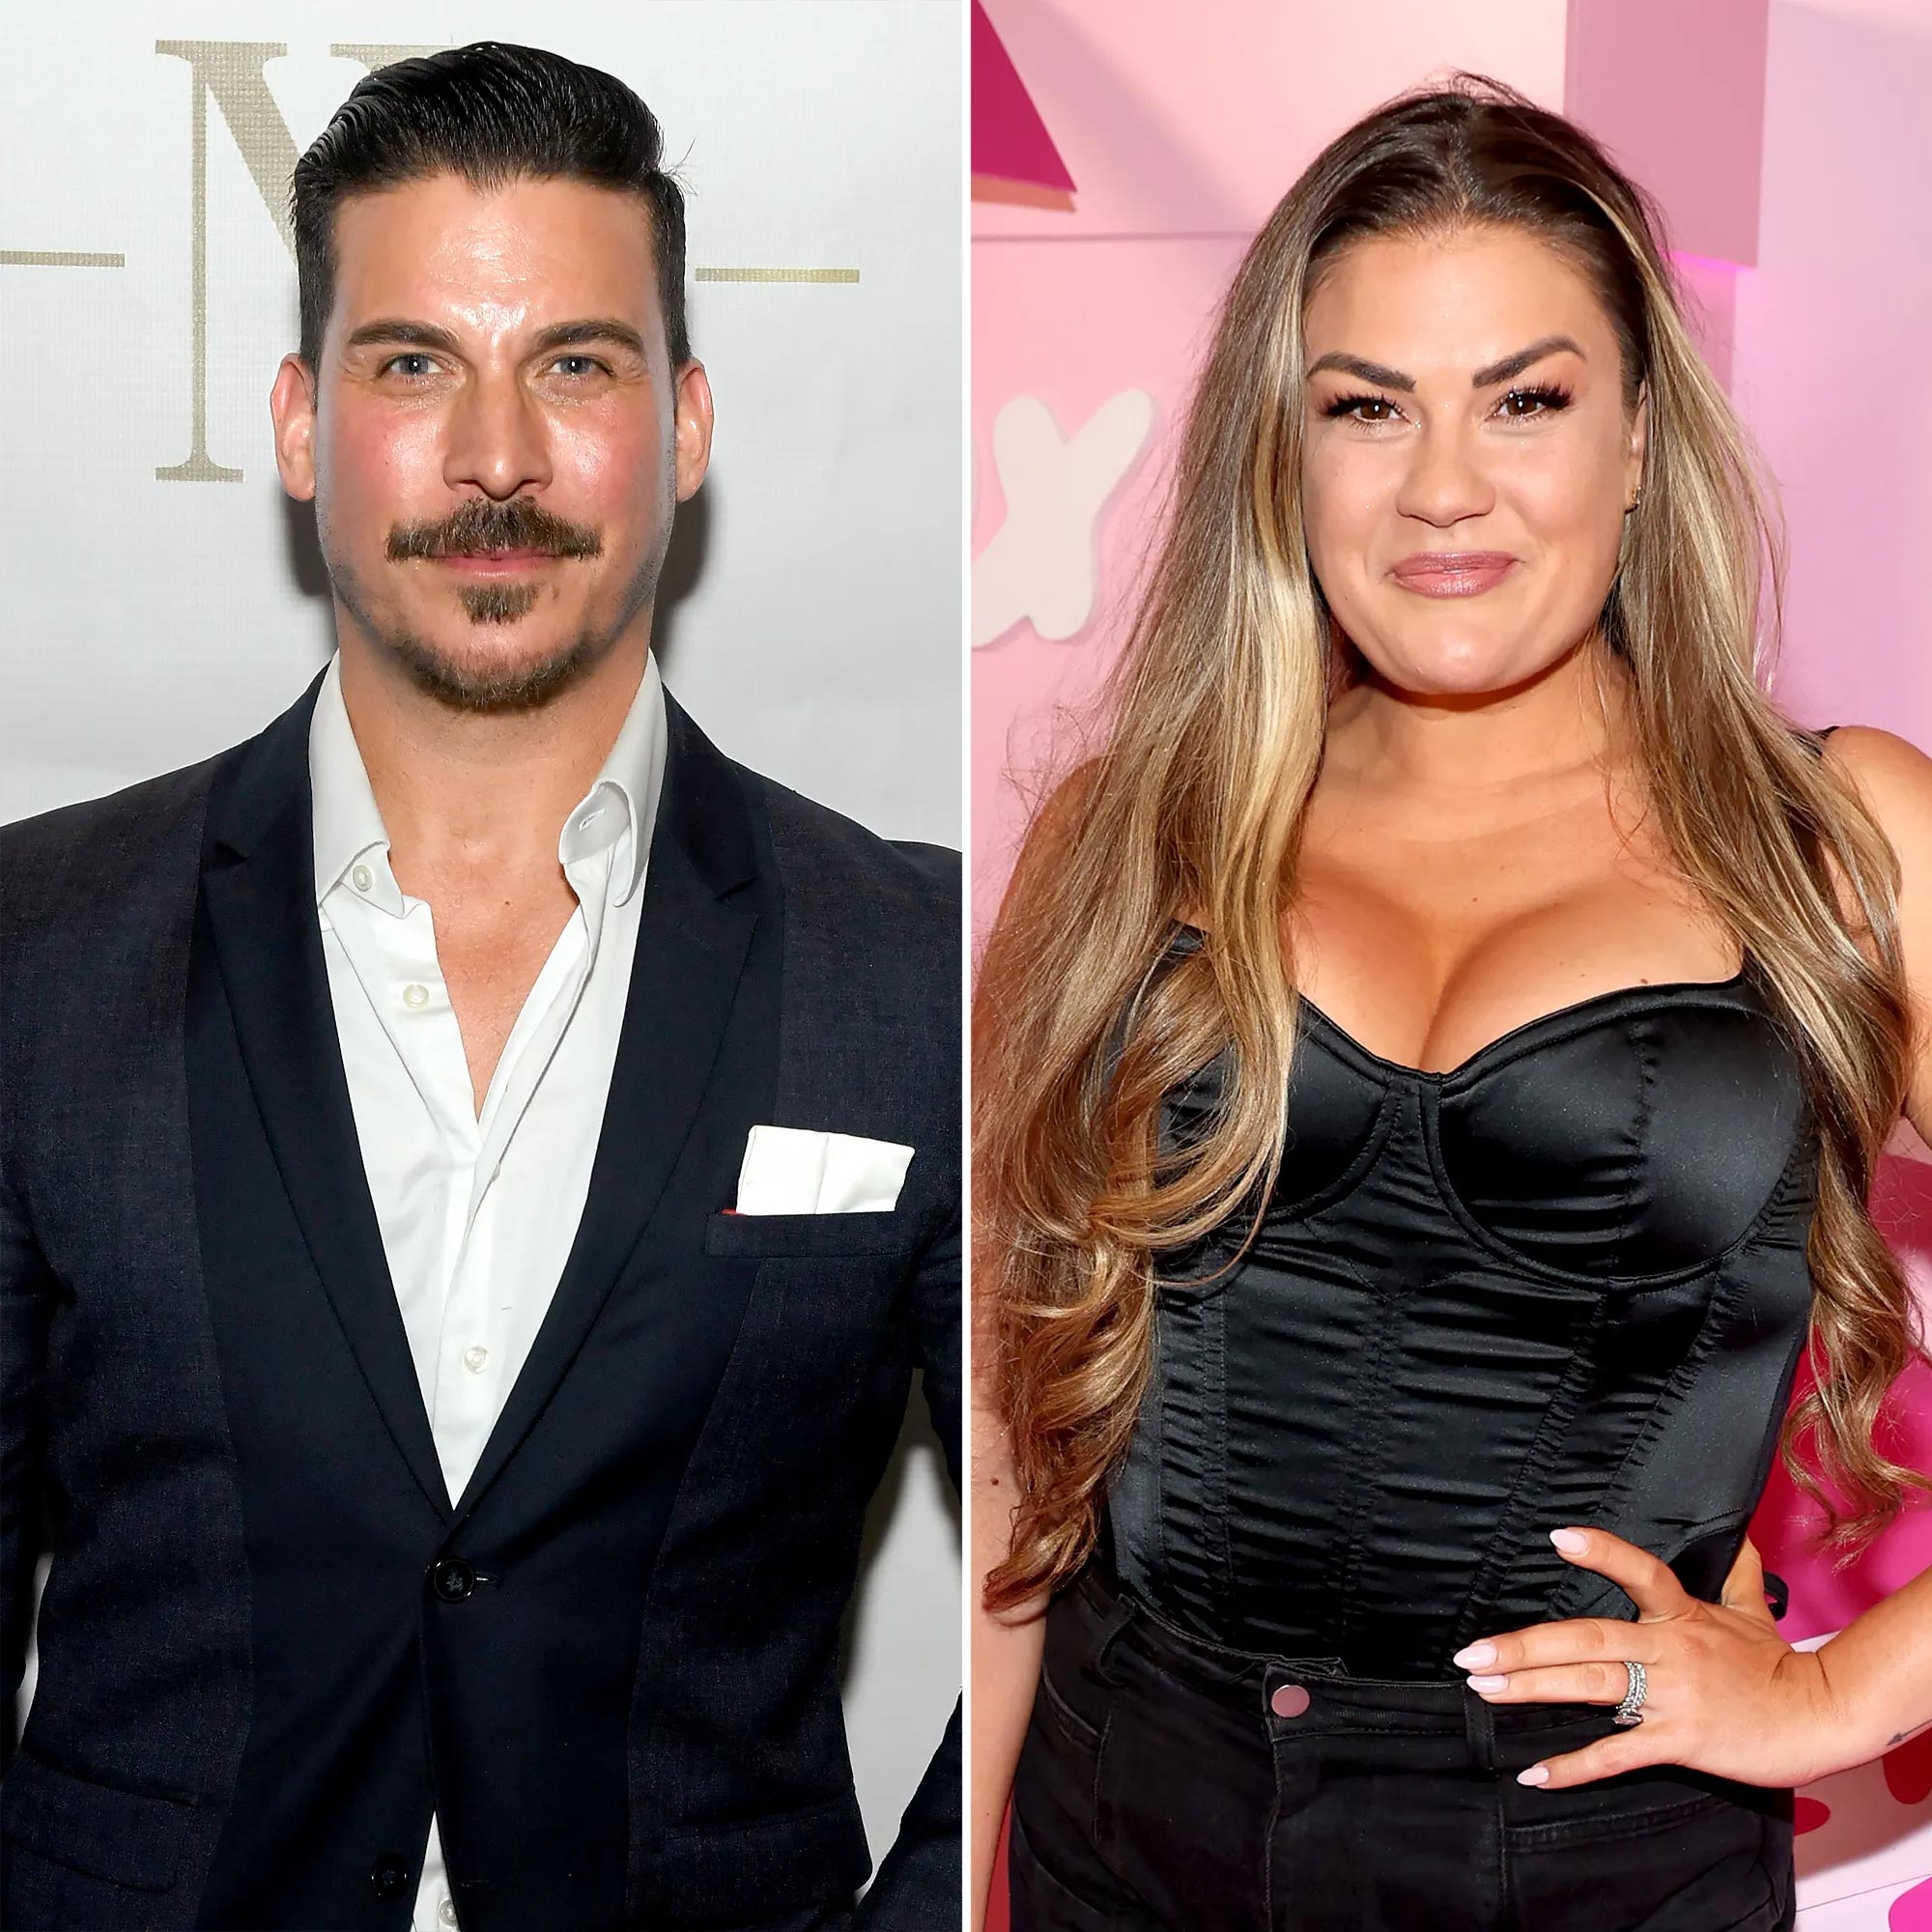 Jax Taylor Thinks Brittany Cartwright Will 'Destroy' Her Body by Drinking Too Much: 'Act Like a Mom'